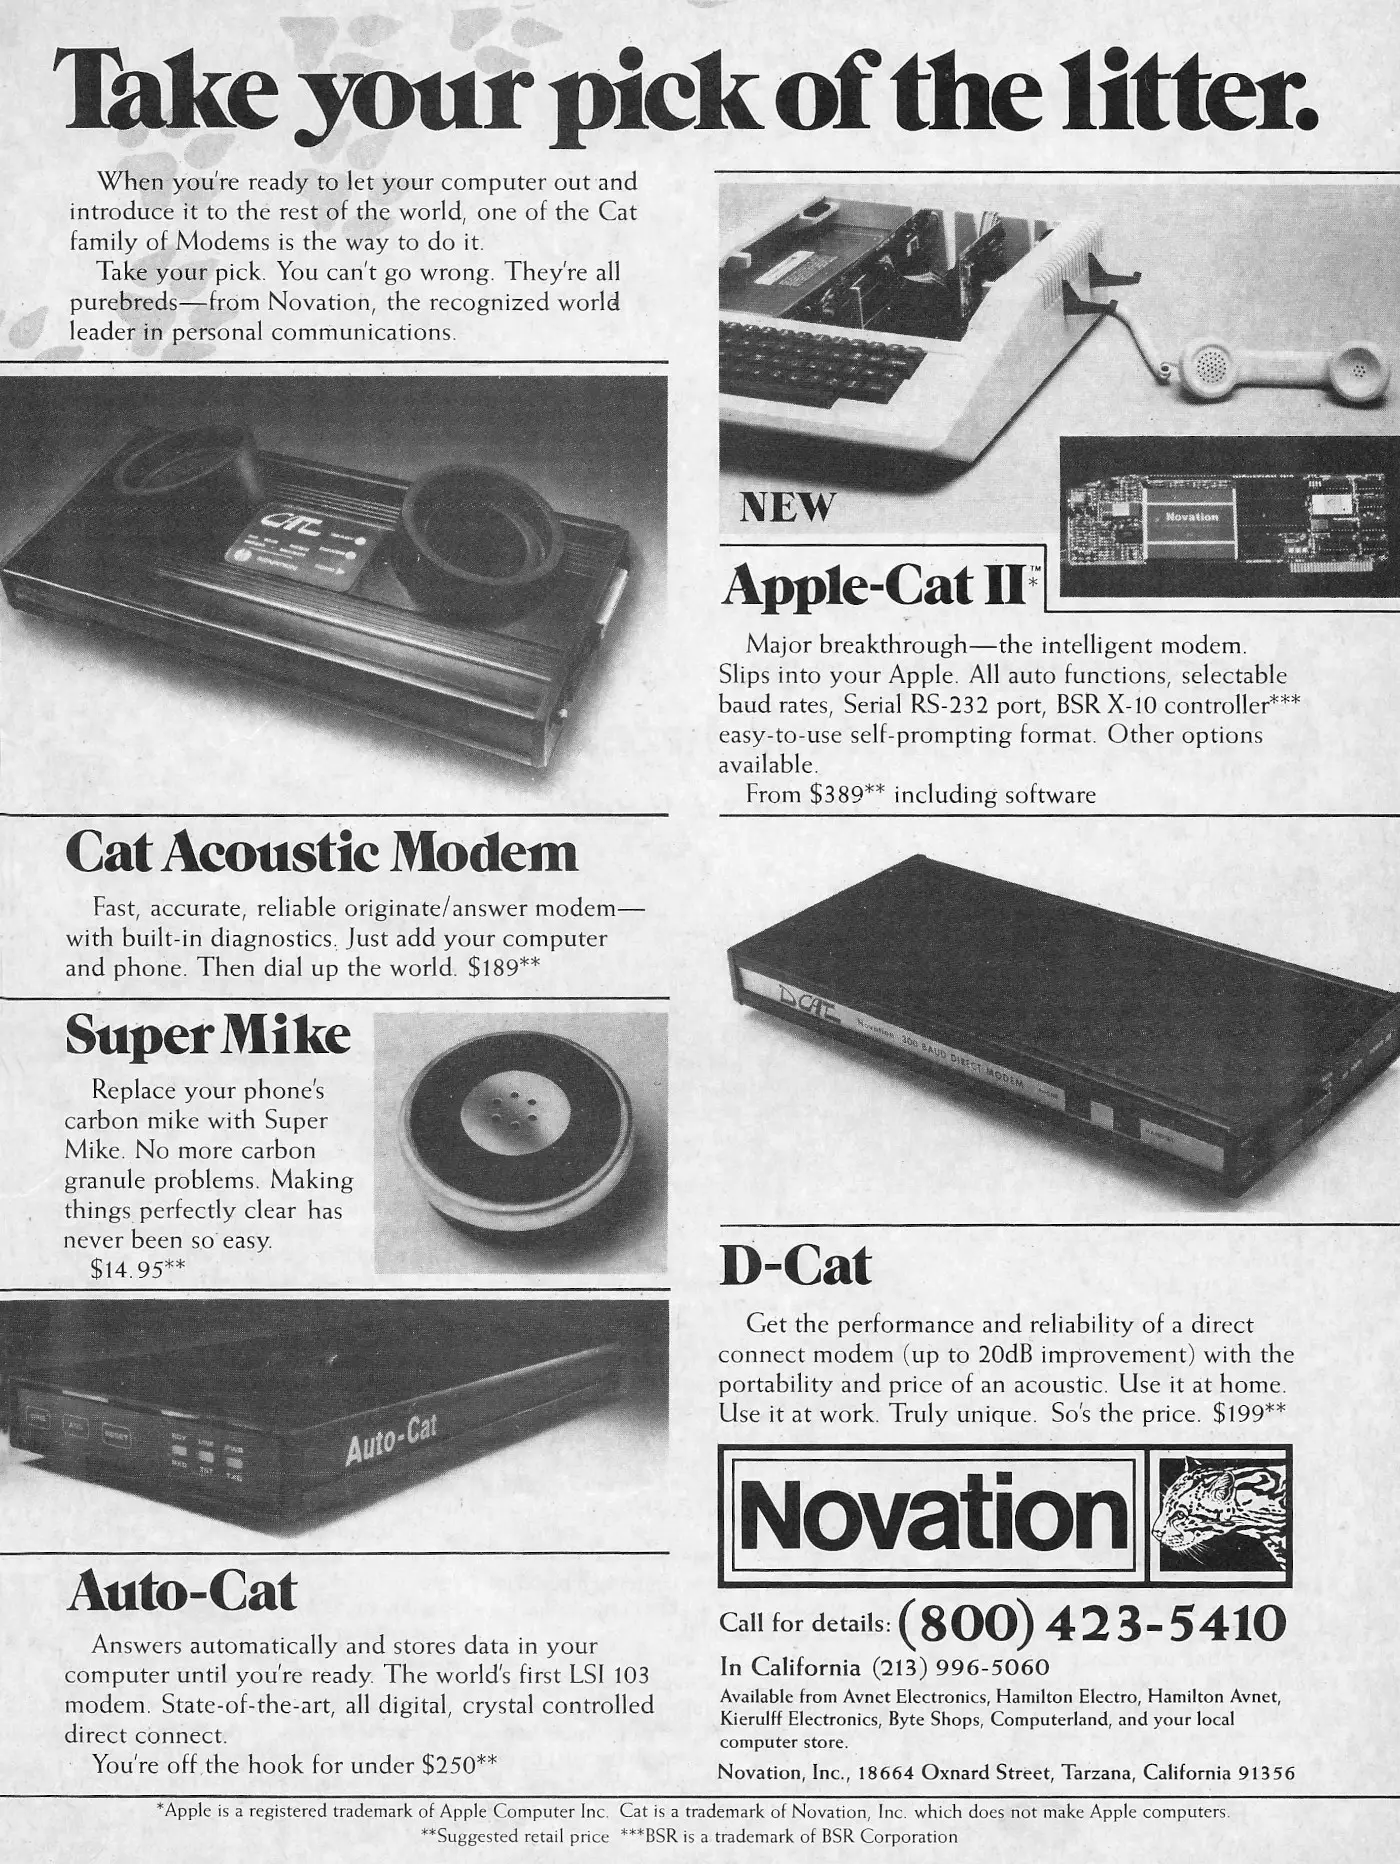 Novation Advert: Take Your Pick of the Litter - Novation, from Creative Computing, February 1980